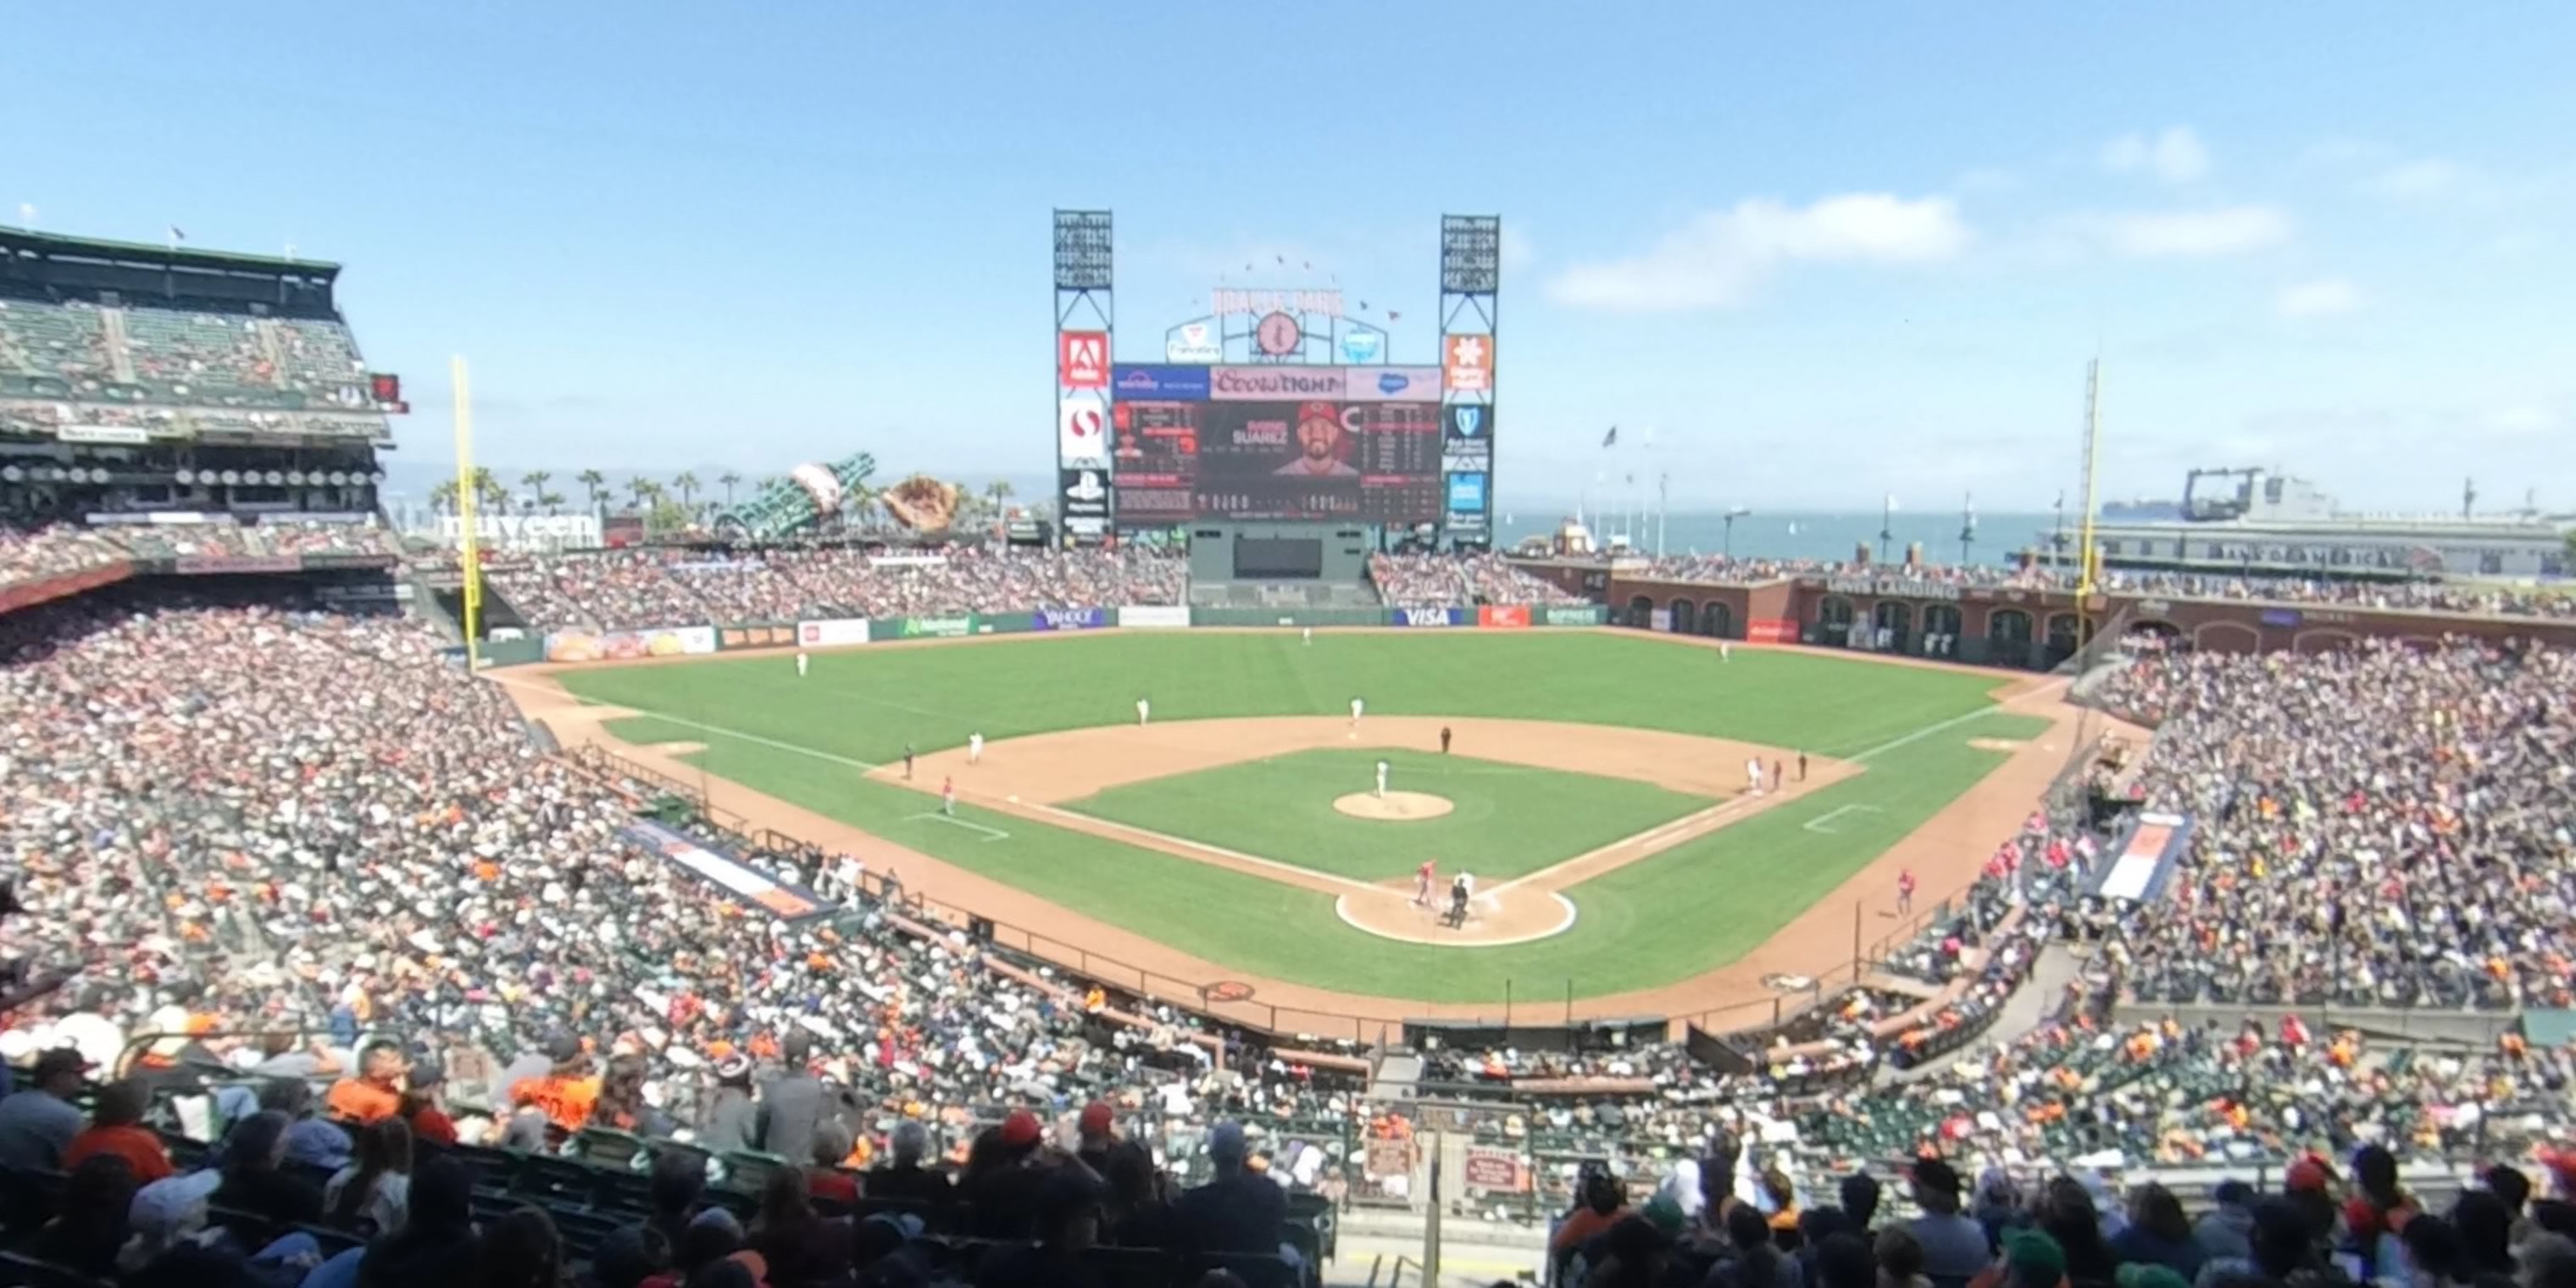 section 216 panoramic seat view  for baseball - oracle park